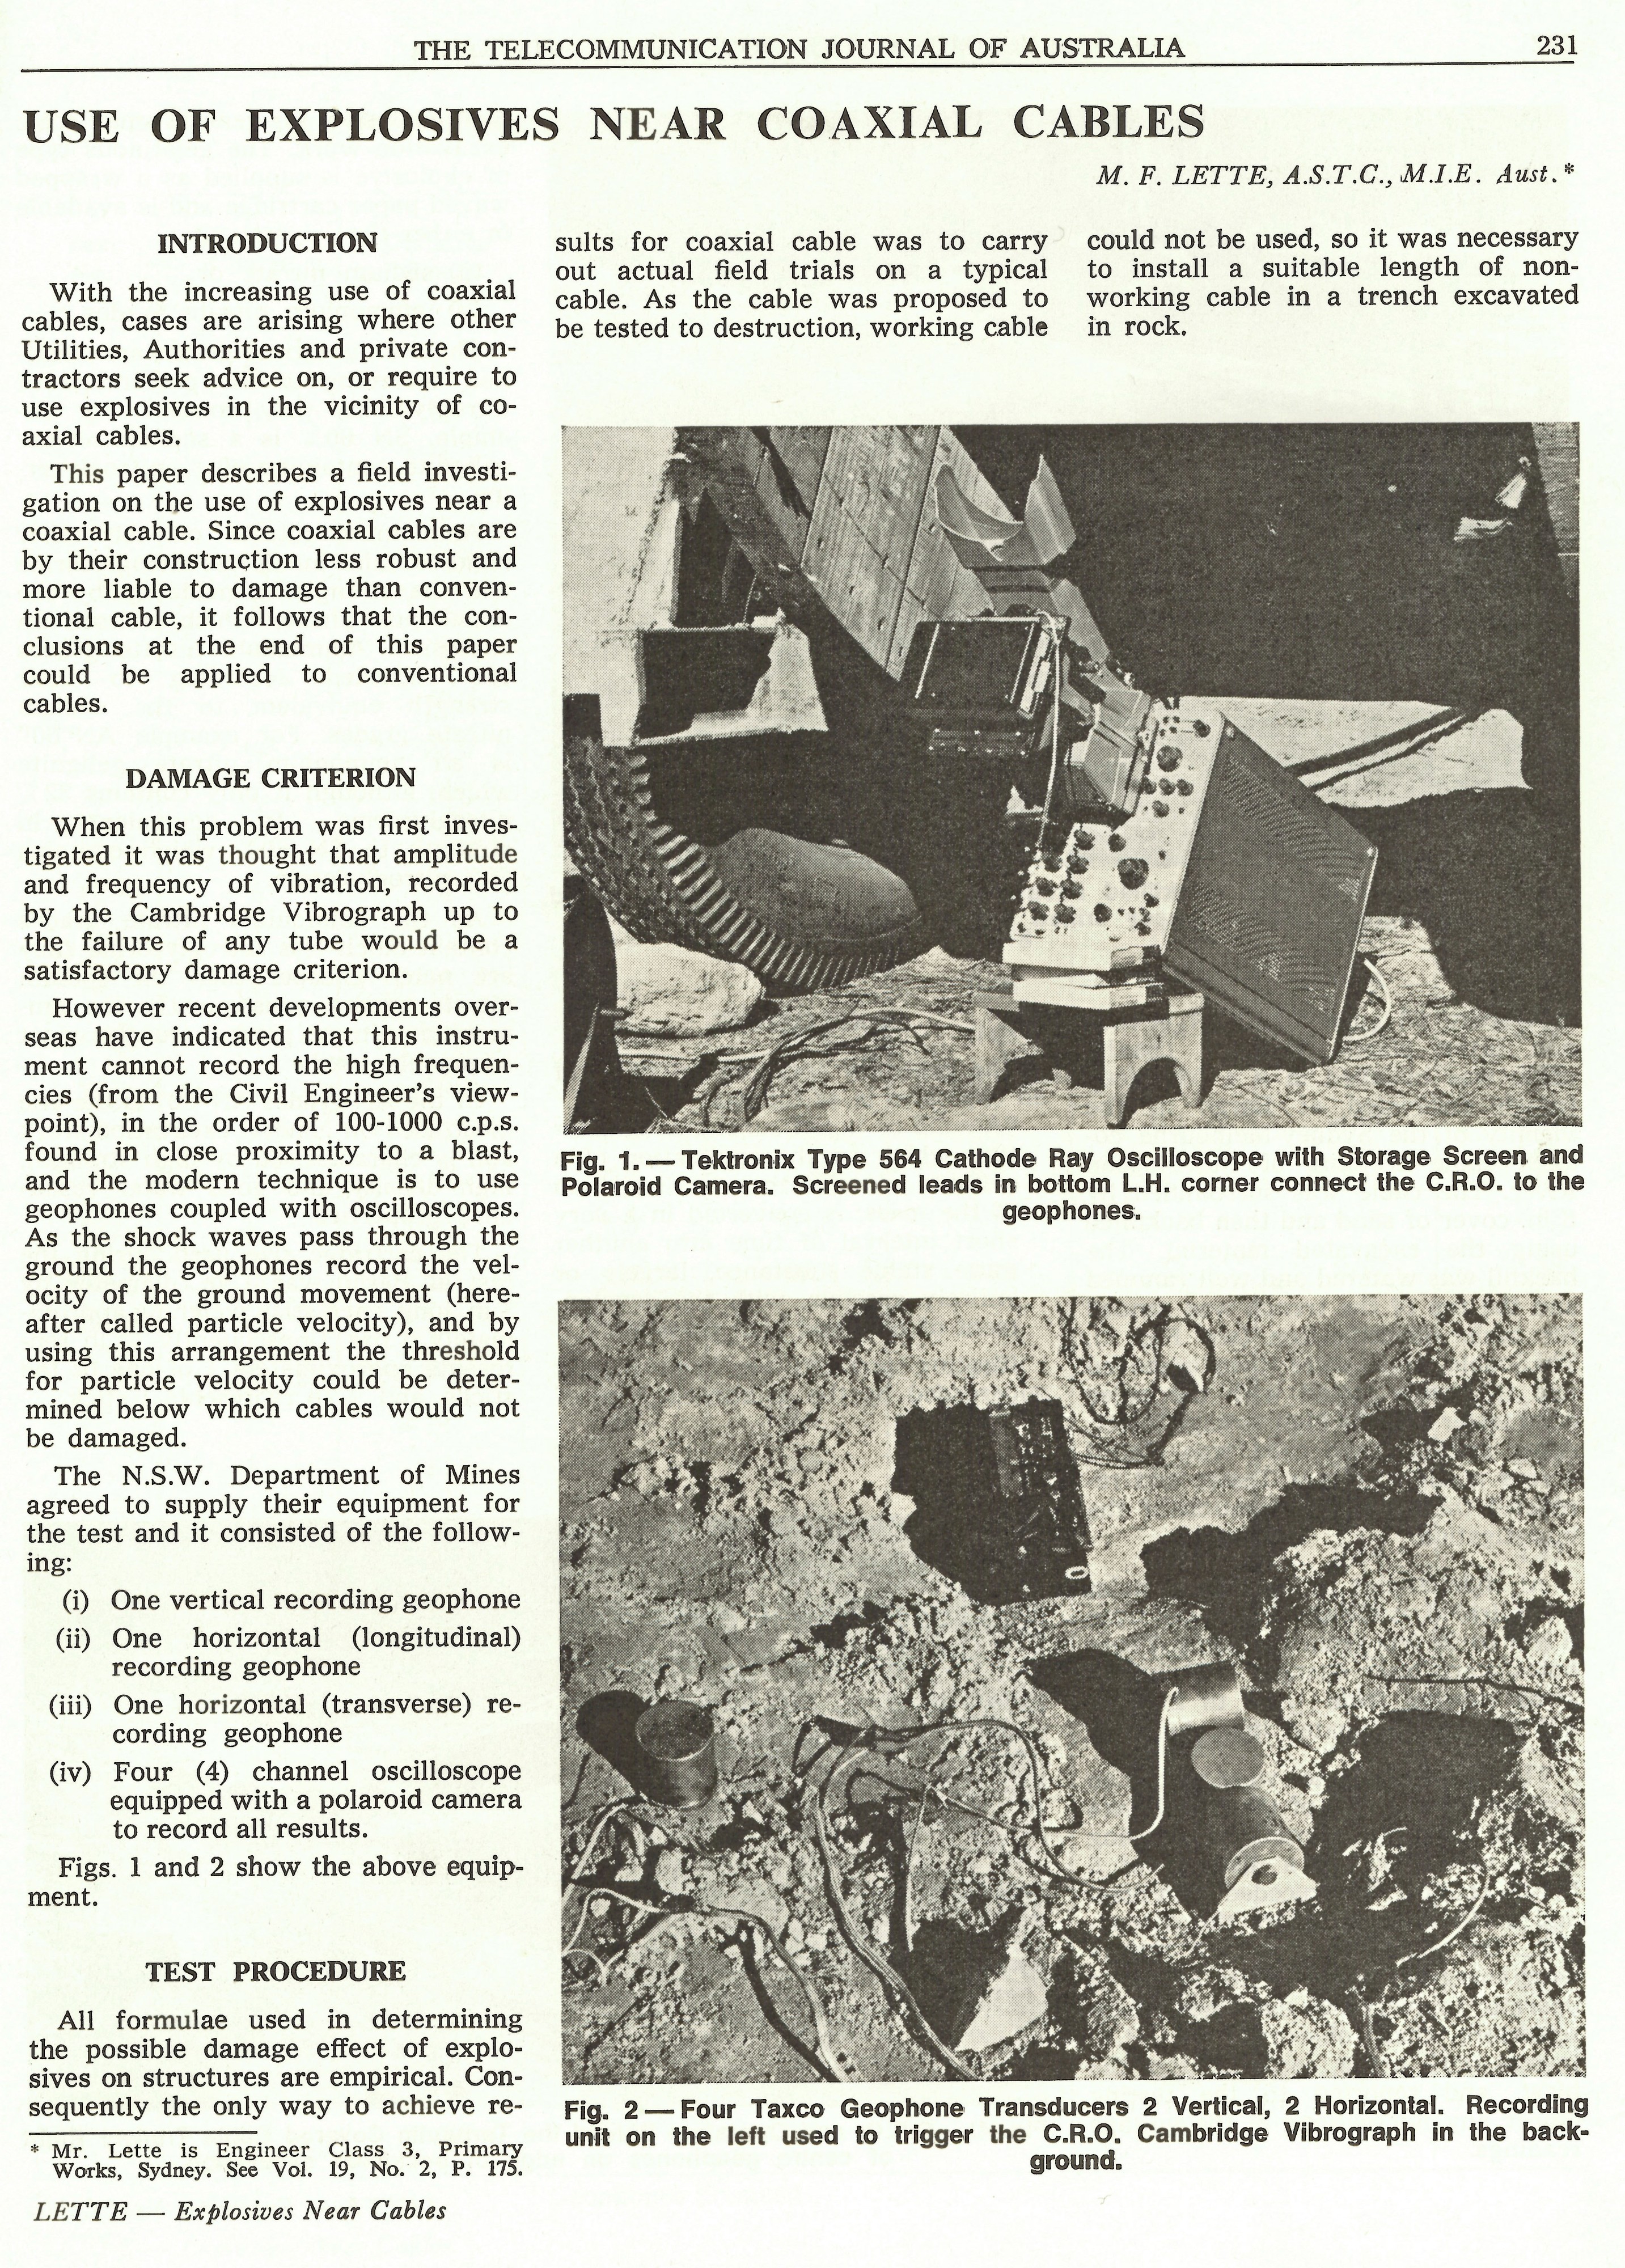 Explosives Near Cables, Page 231